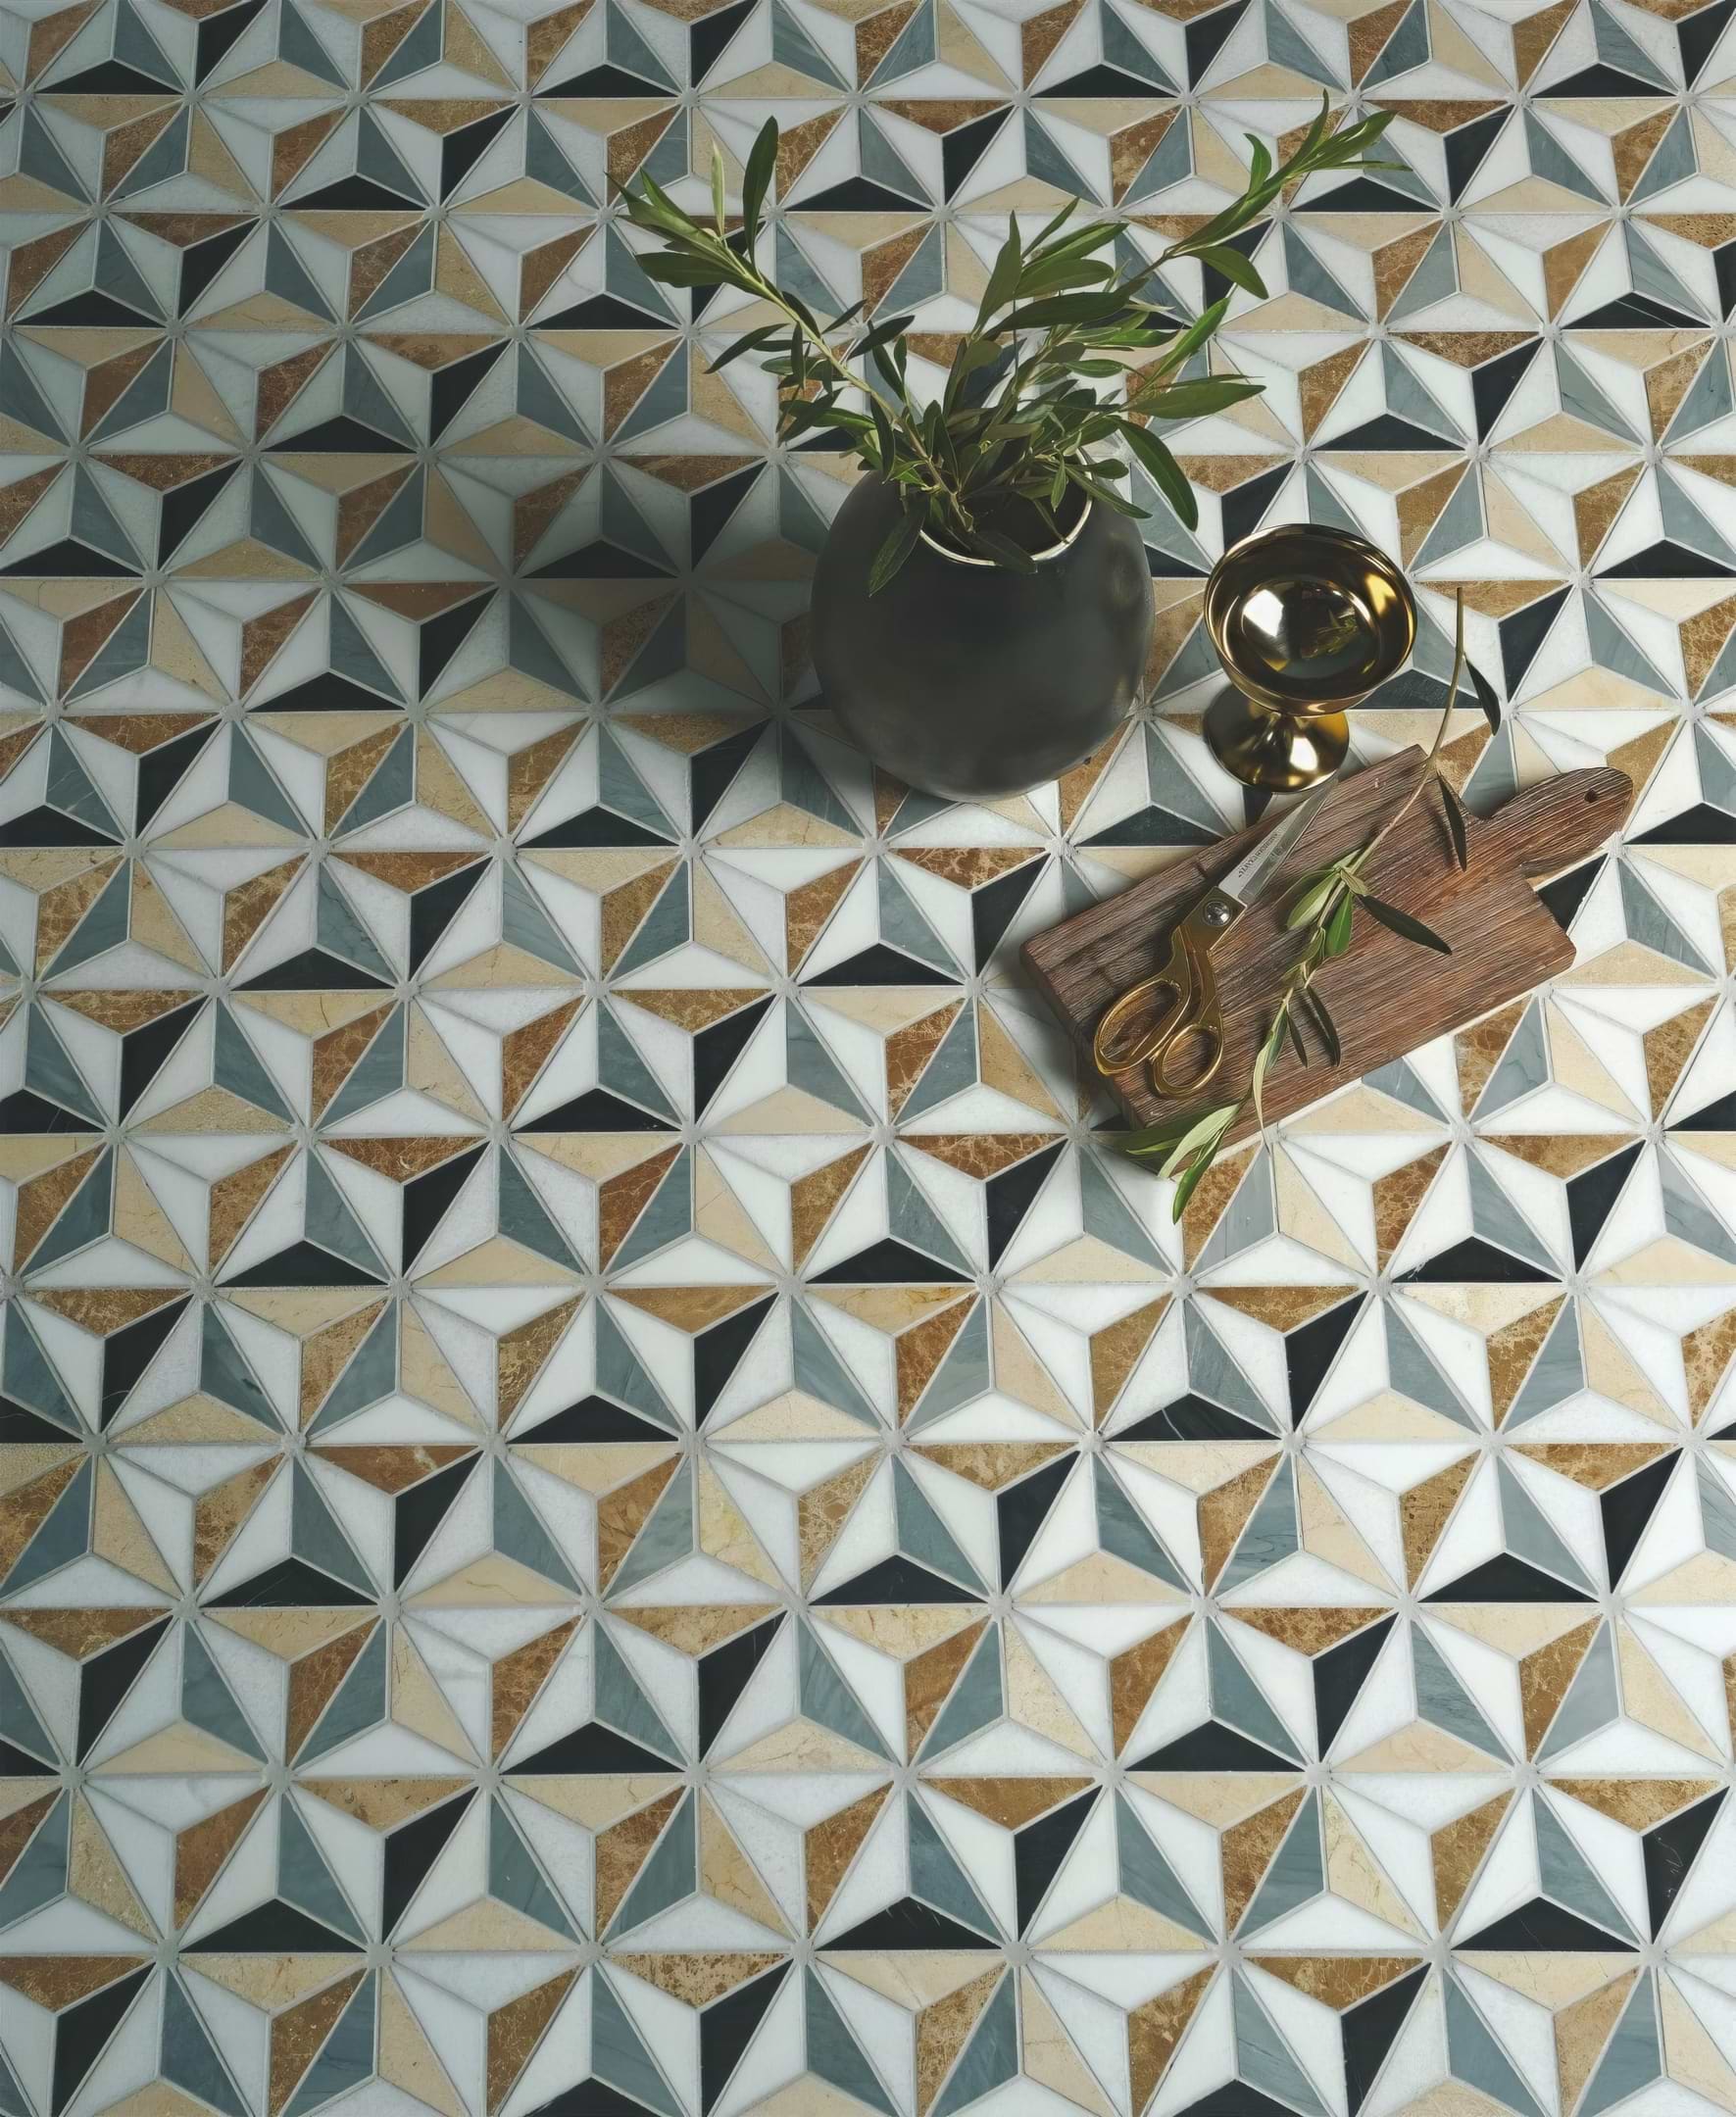 Istanbul Marble Mosaic - Hyperion Tiles